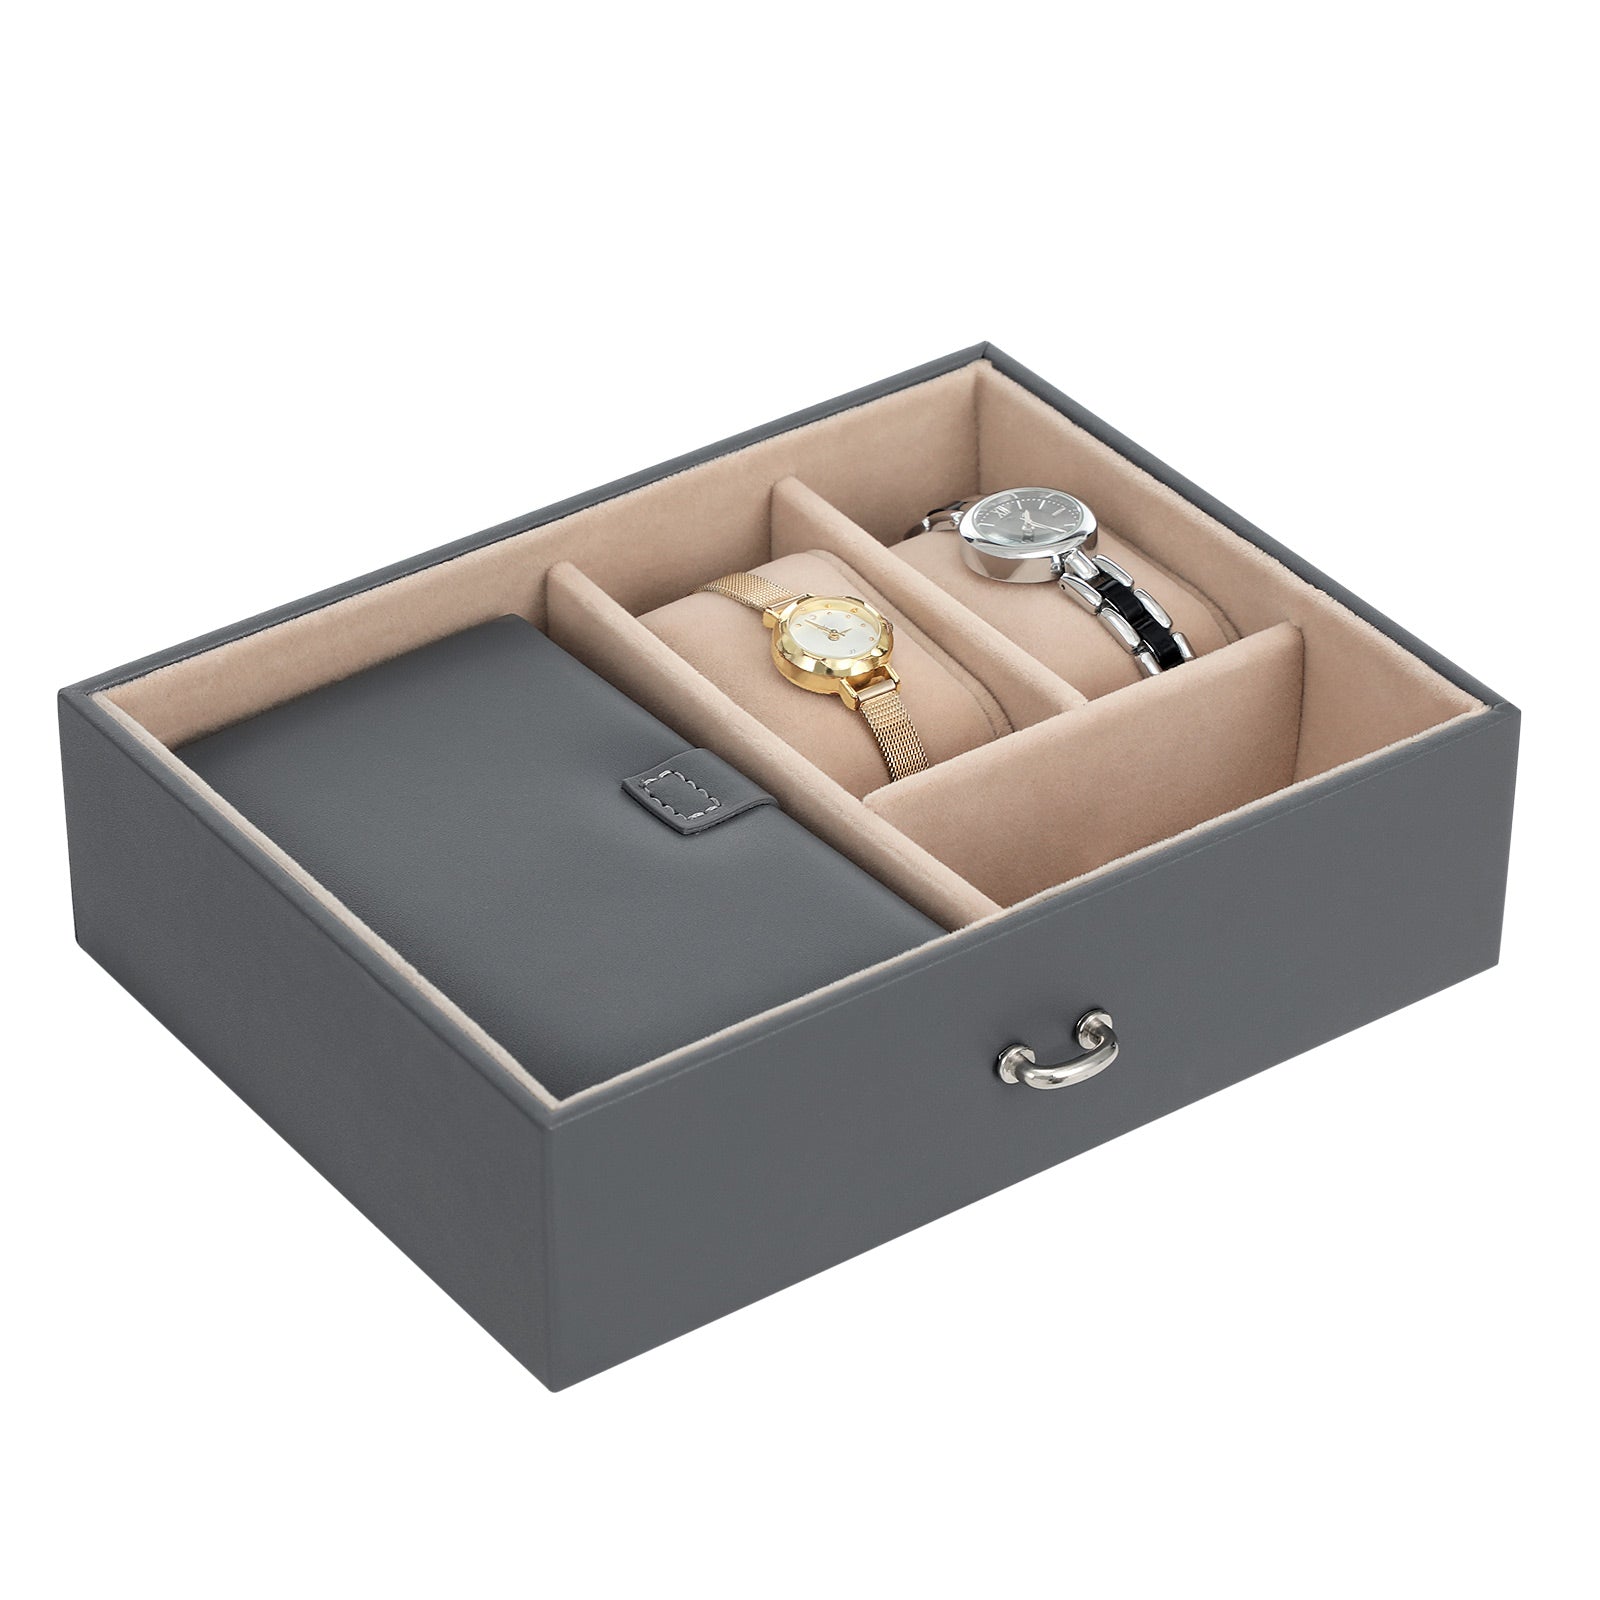 Jewellery Box, Jewellery Organiser with 2 Drawers, Lockable Jewellery Case with Mirror, Portable Travel Case, Songmics, 4